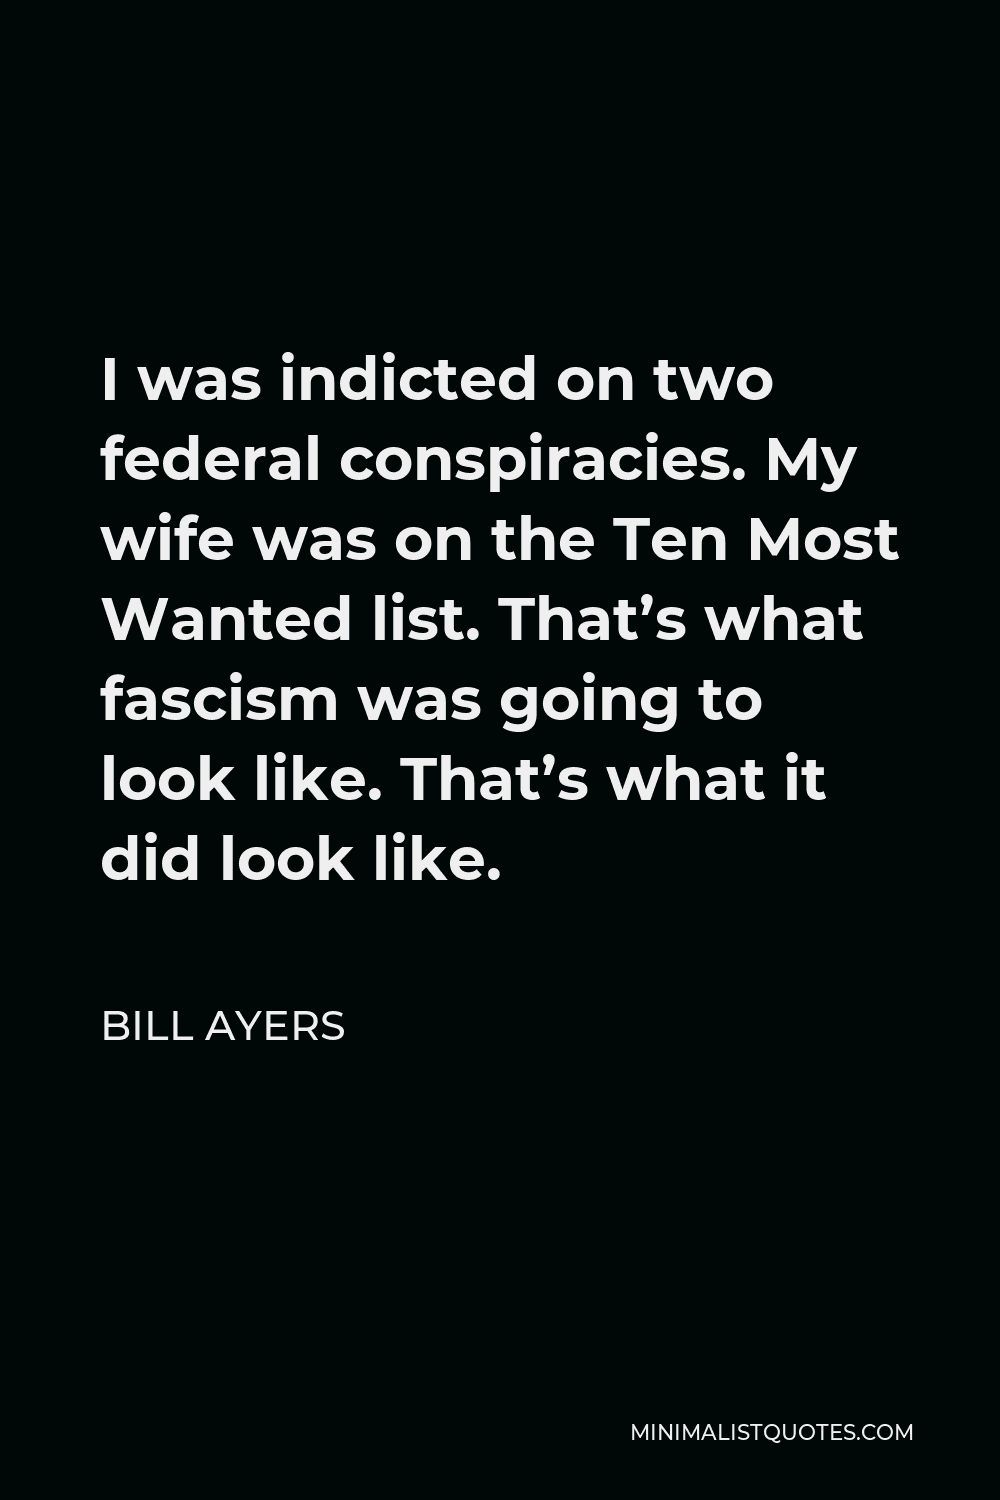 Bill Ayers Quote - I was indicted on two federal conspiracies. My wife was on the Ten Most Wanted list. That’s what fascism was going to look like. That’s what it did look like.